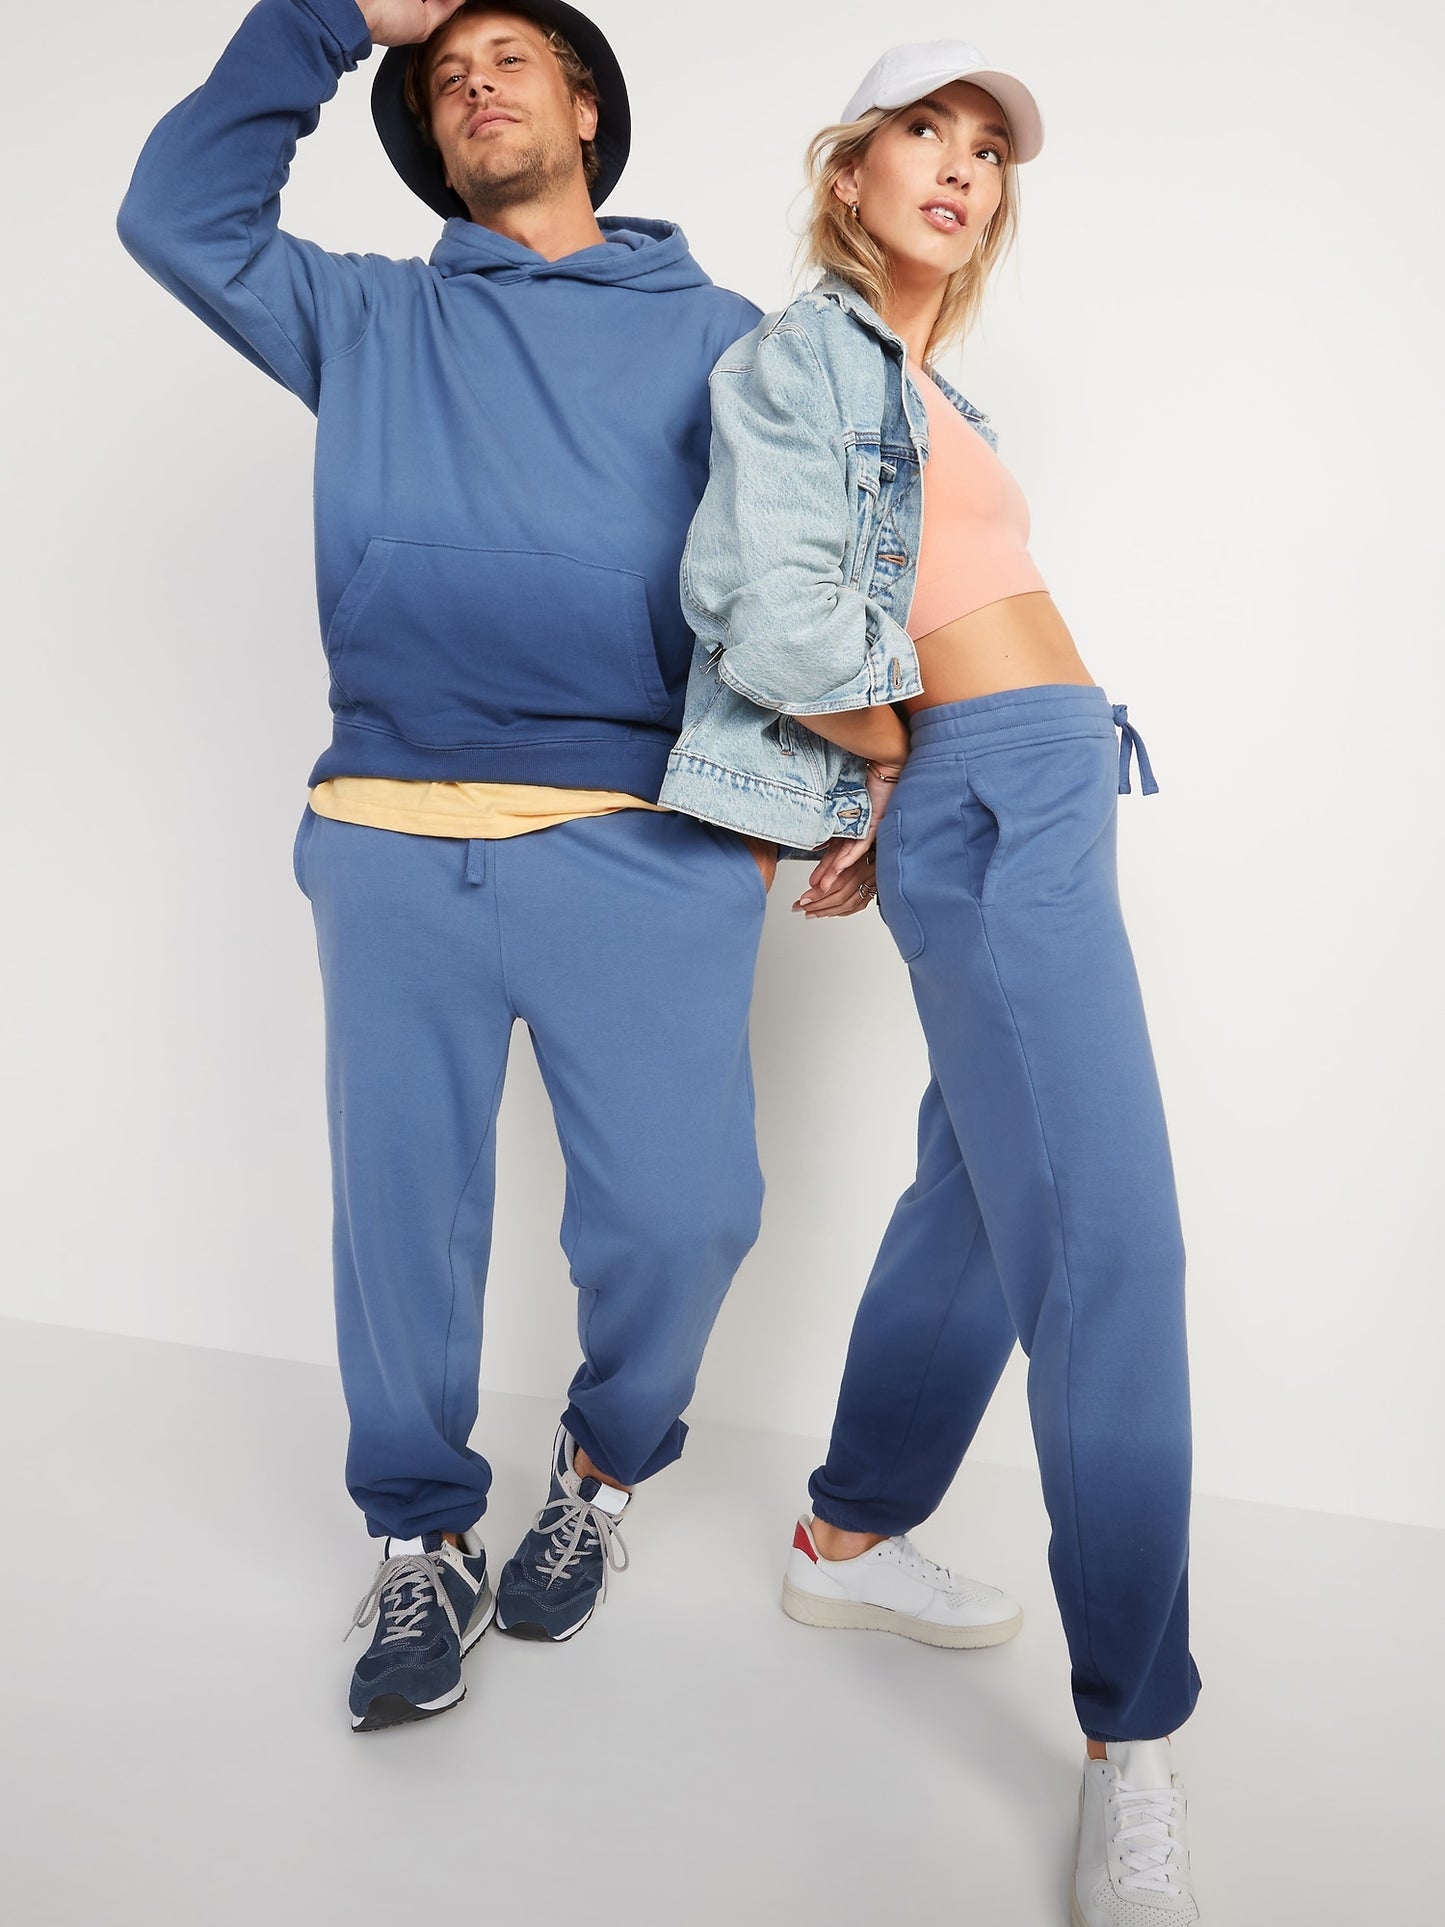 Old Navy Gender-Neutral Dip-Dye Sweatpants for Adults